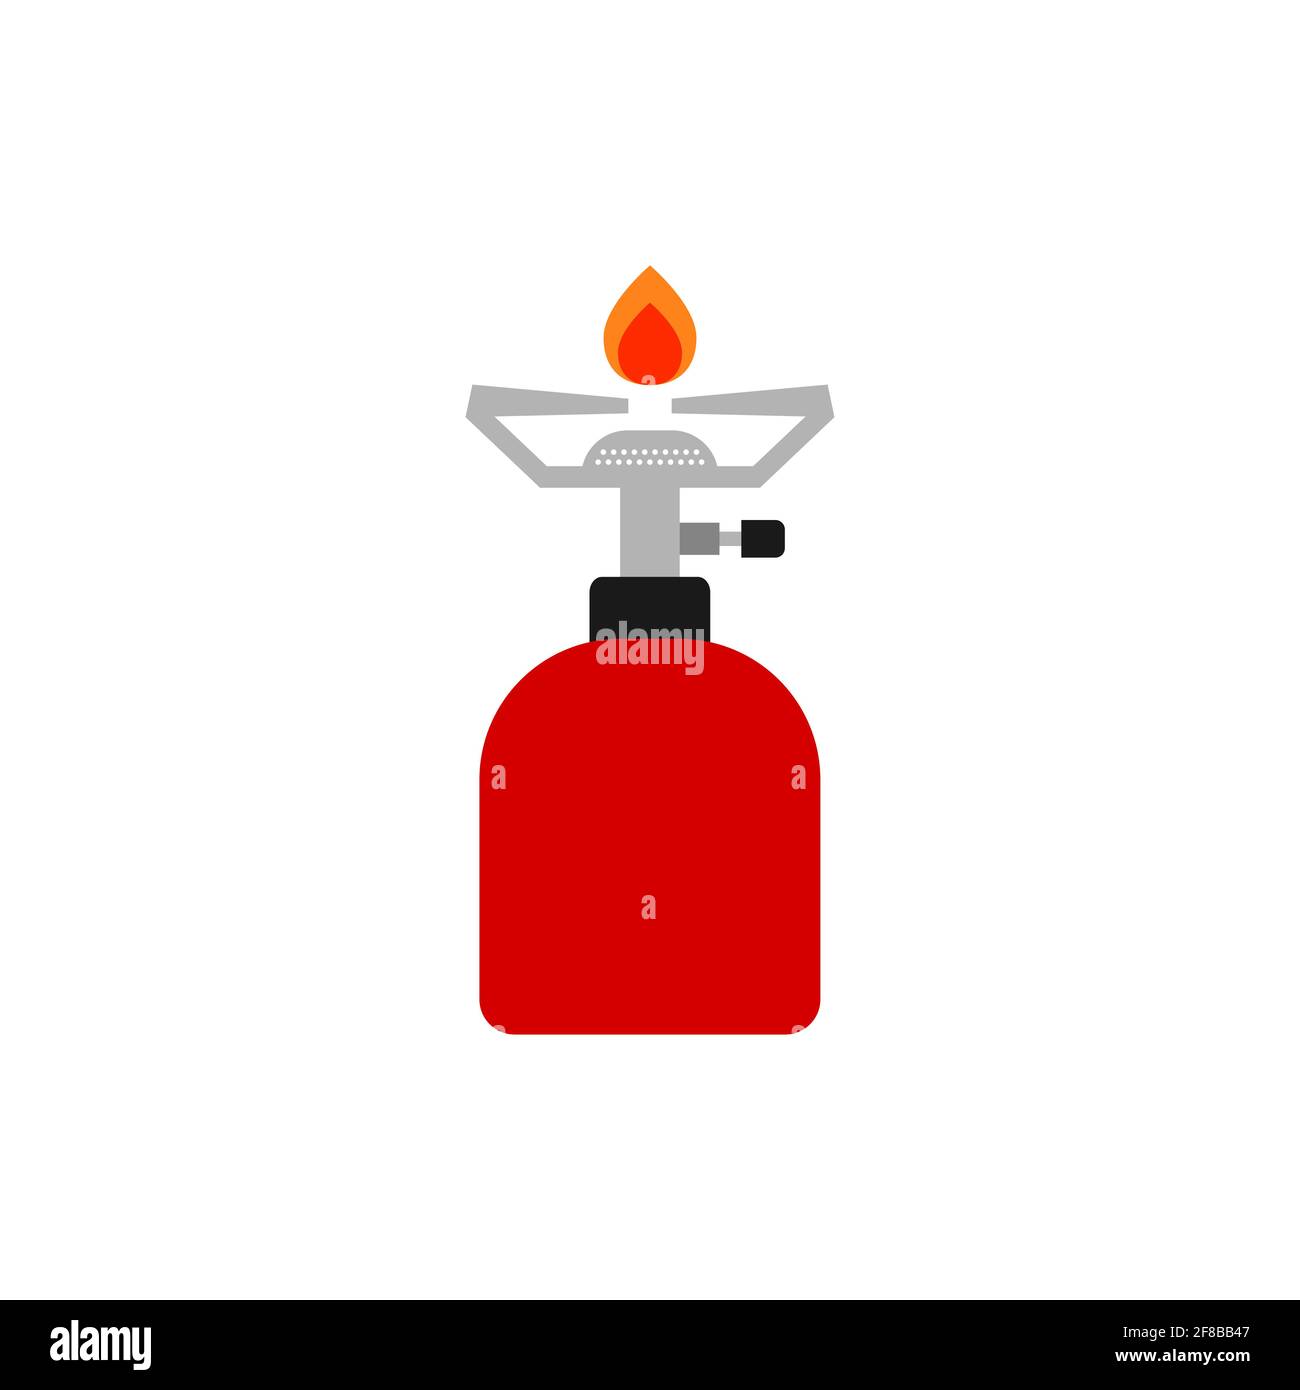 Gas camping stove color icon. Camping, outdoor, travel equipment. Cooking food in nature or without electricity. Small propane portable camp stove. Stock Vector